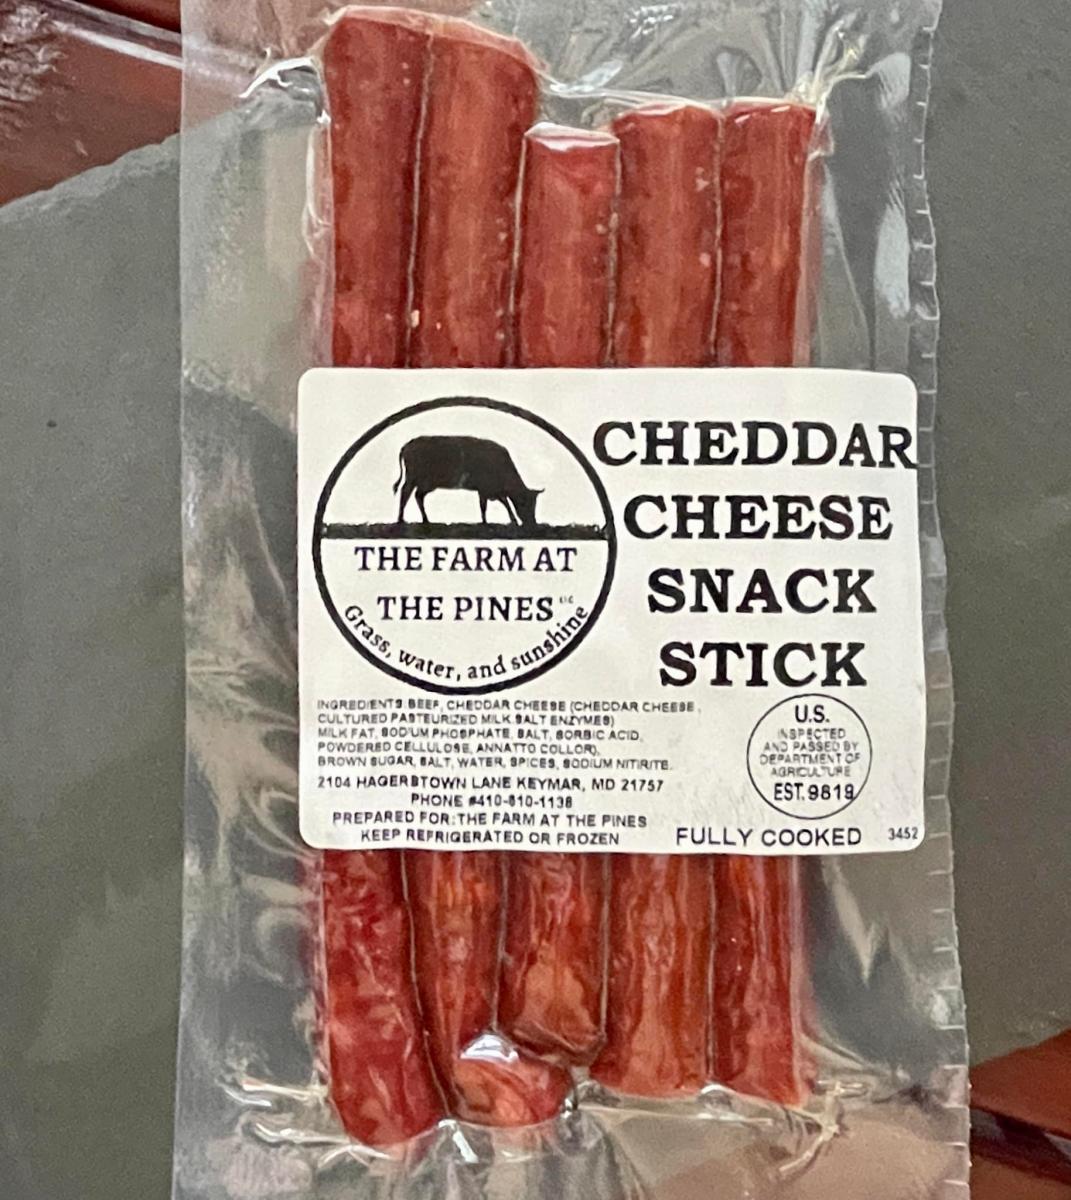 Sweet Beef and Cheddar Snack Sticks